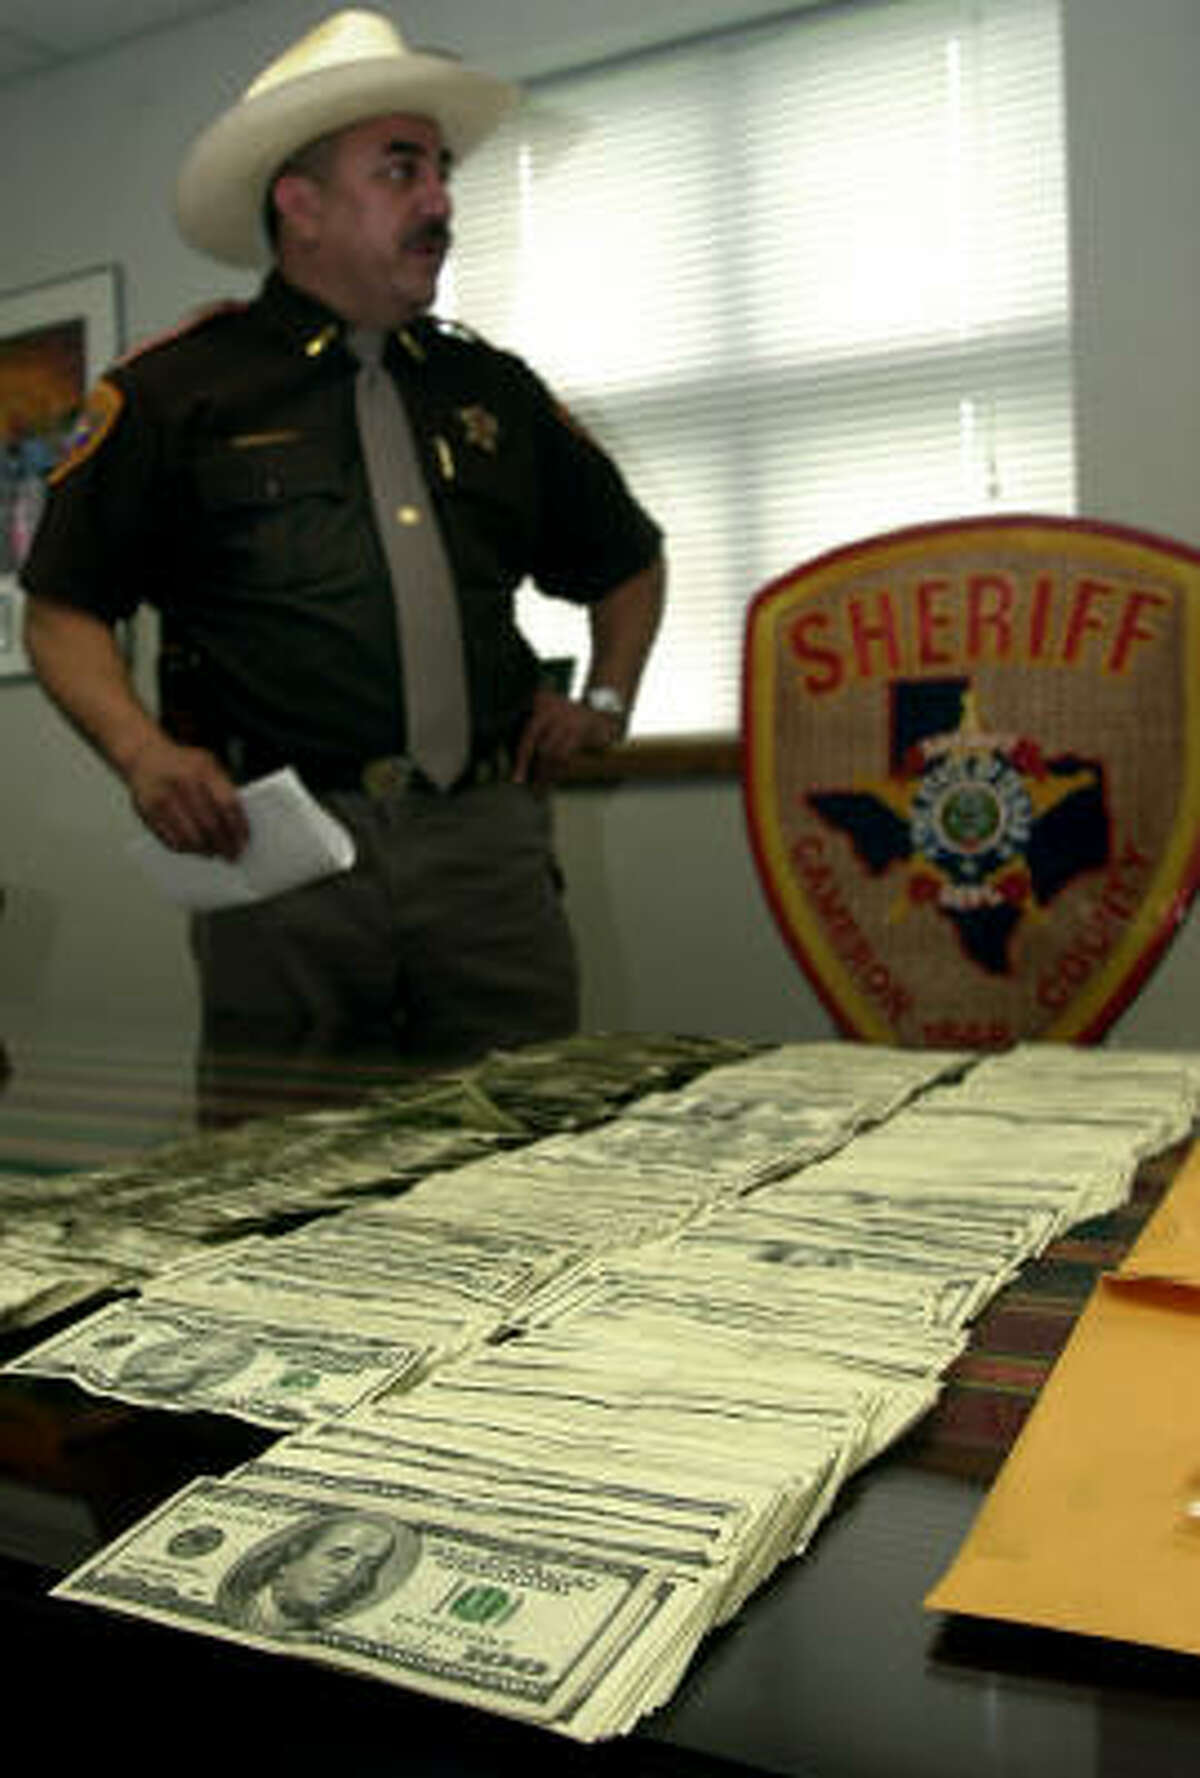 Before: In June 2003, Cameron County Sheriff Conrado Cantu holds a news conference to announce the seizure of more than $40,000 during the search of a bus outside a Brownsville convenience store.